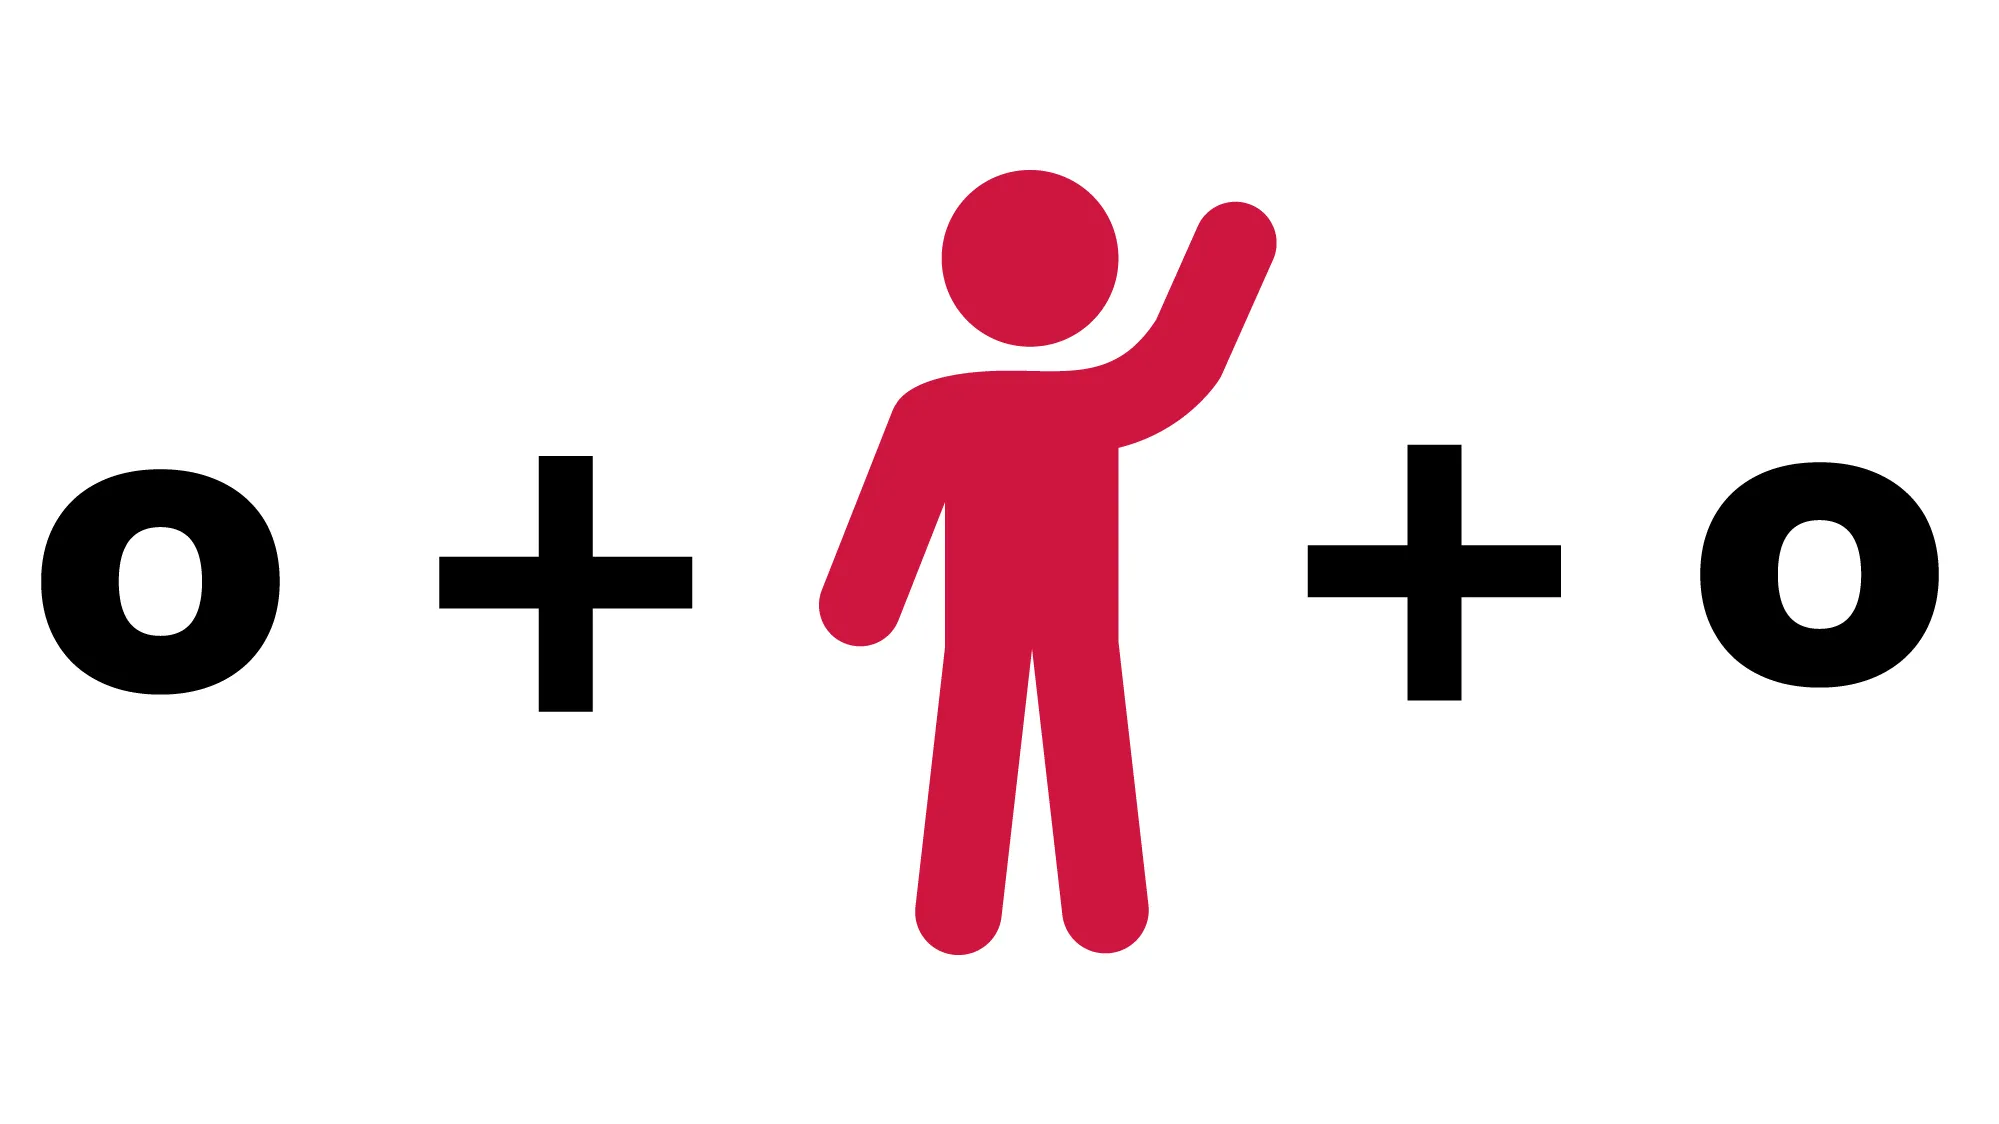 An example of the puzzle shows black letters and a red stick man waving.